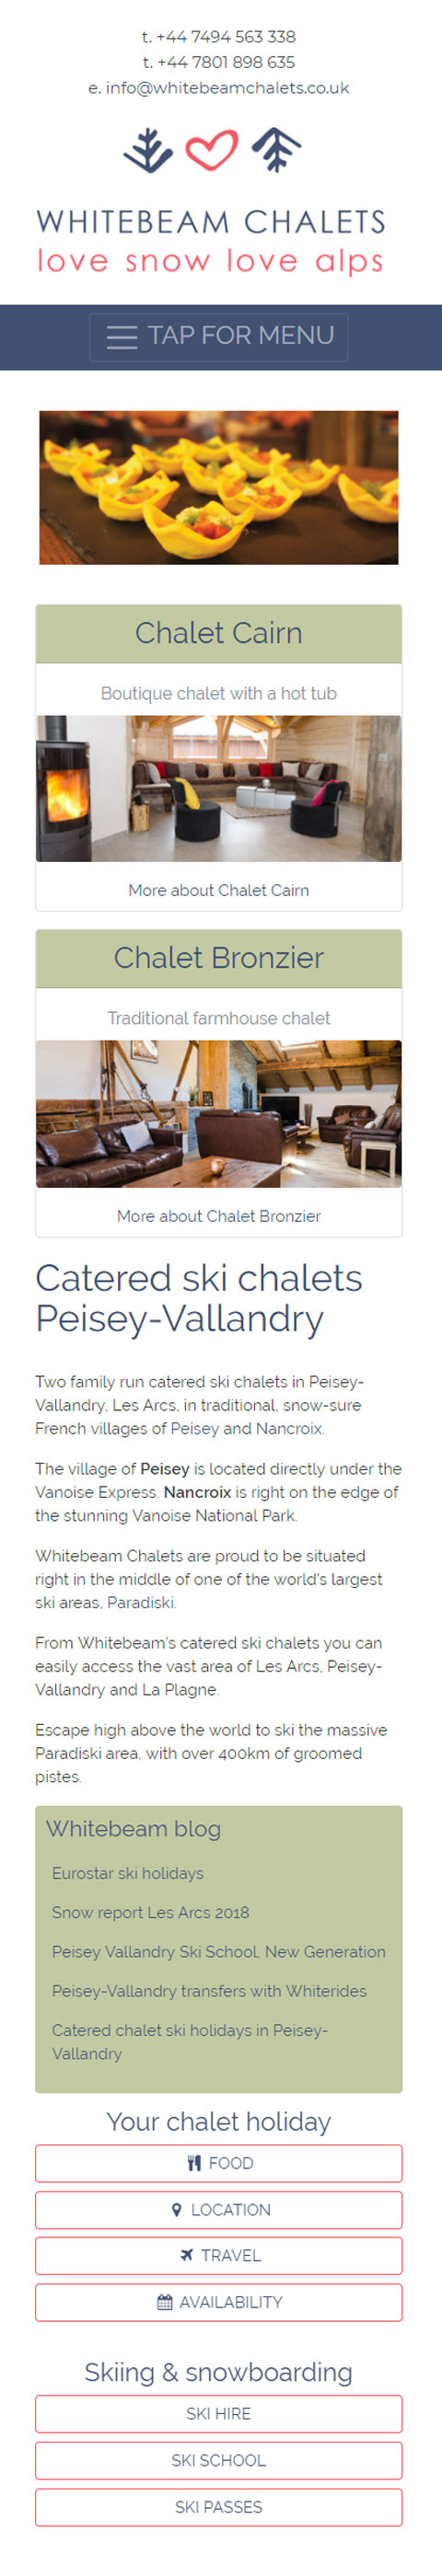 Mobile ready chalet company website